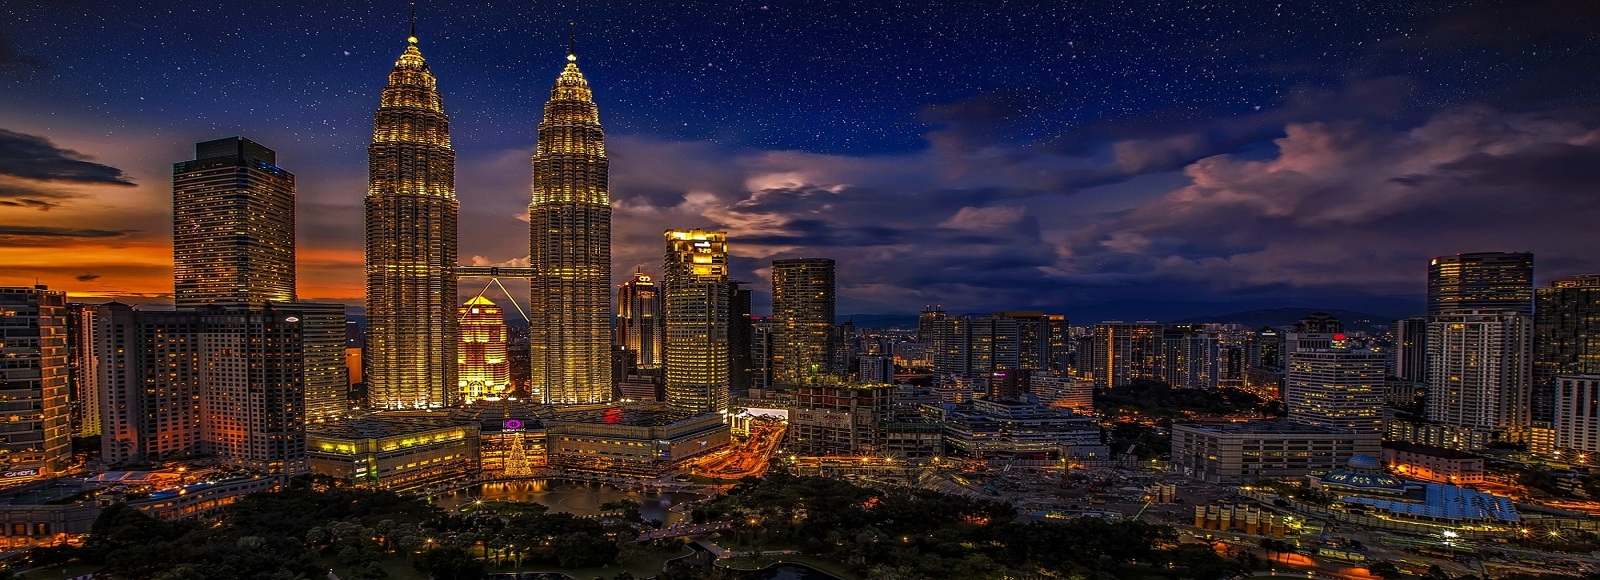 Transfer Offers in Malaysia. Low Cost Transfers in  Malaysia 